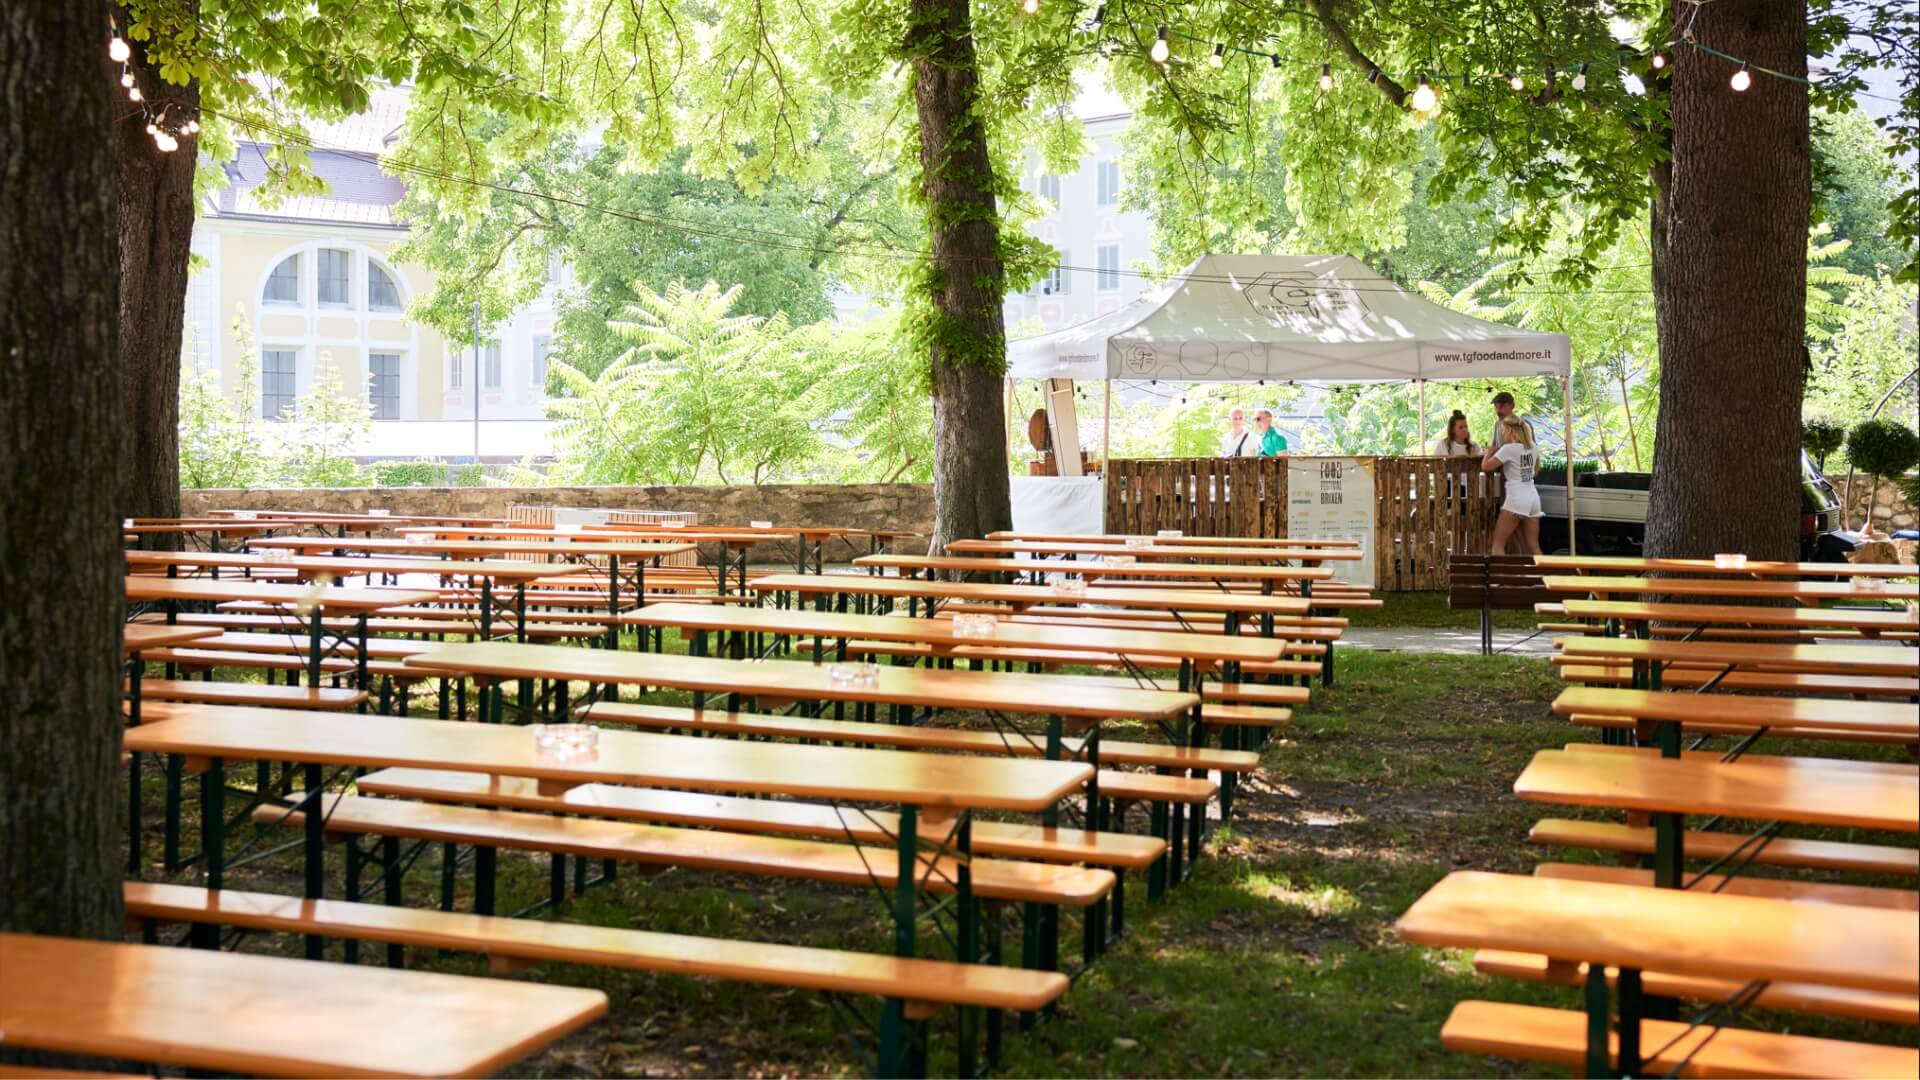 At the Street Food Festival, many classic beer garden table sets were set up in the green.